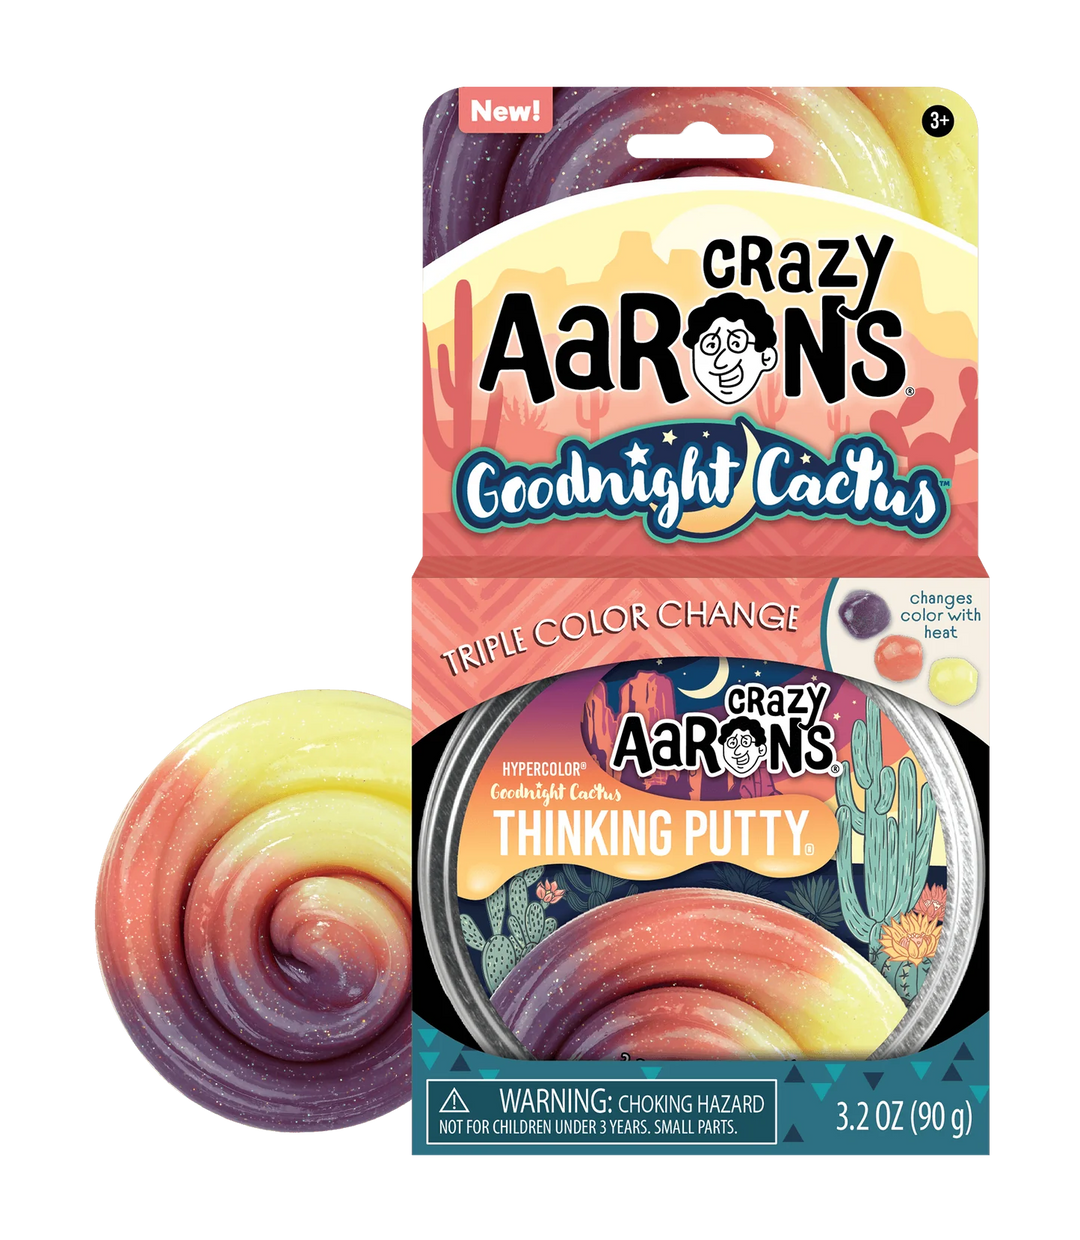 Crazy Aaron's Goodnight Cactus Hypercolor Thinking Putty